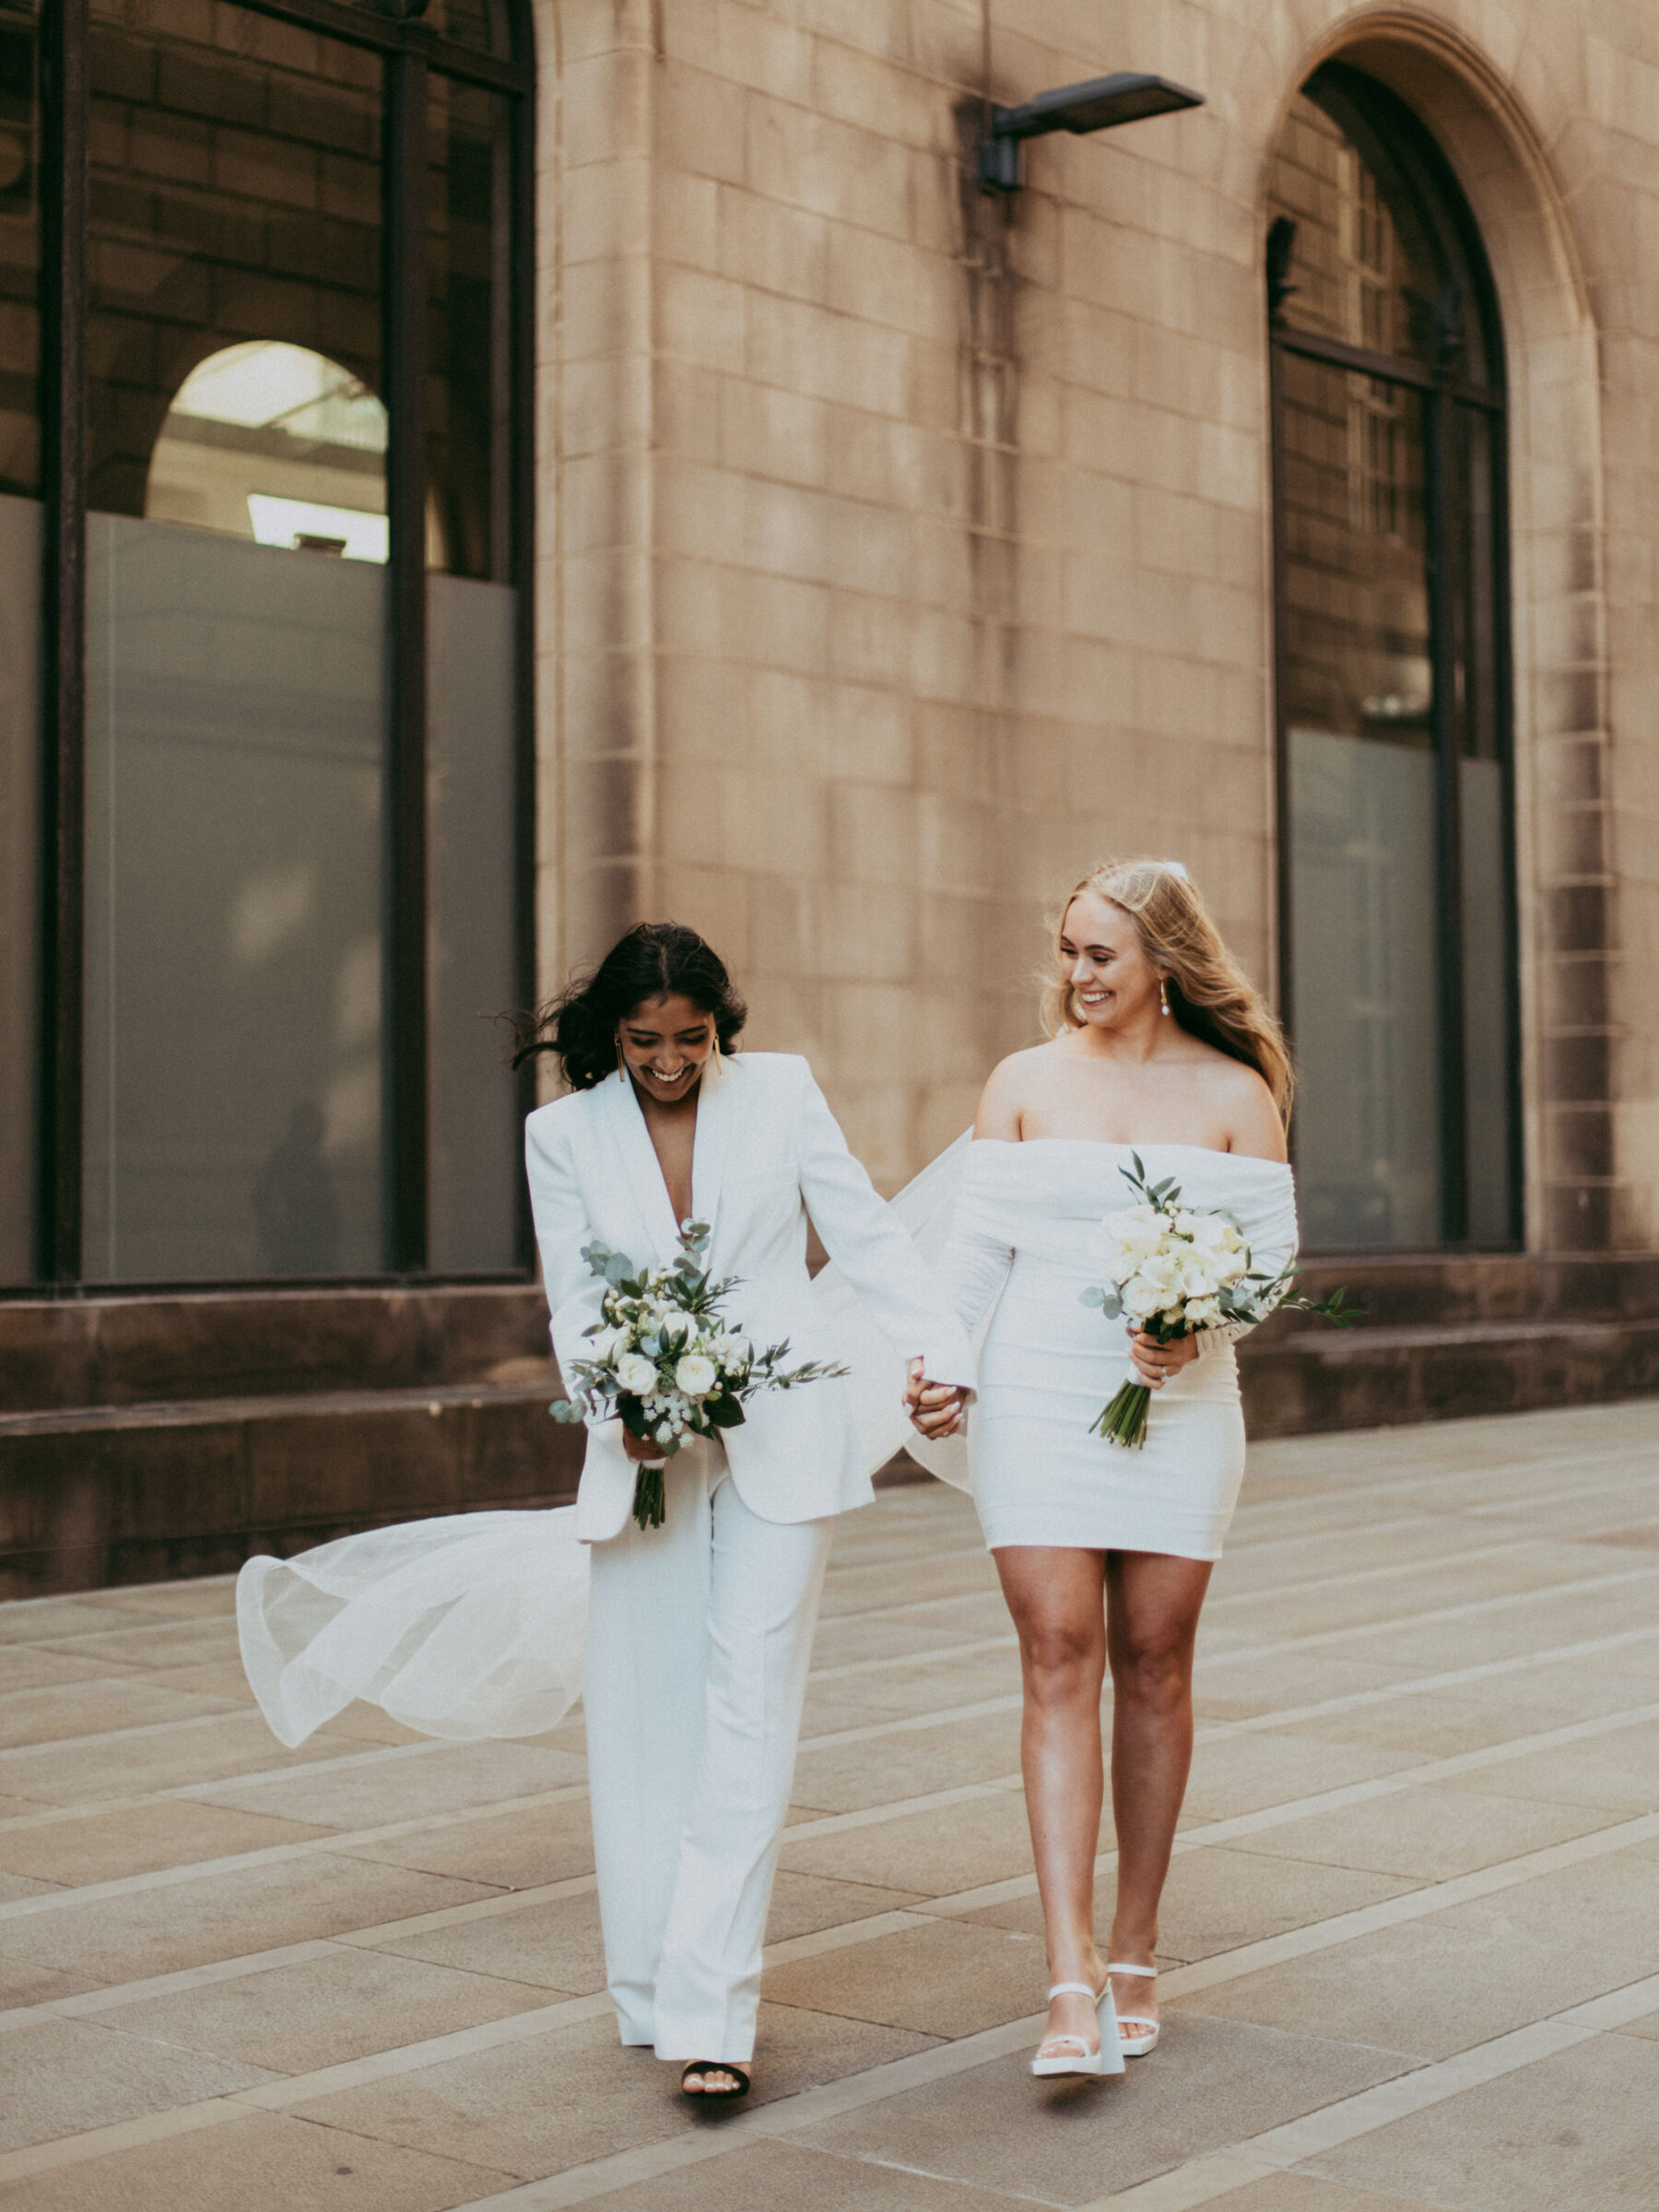 Lesbian bride in a suit holding hands with her Lesbian bride in a short dress and long veil. Daniel Mice Photography.